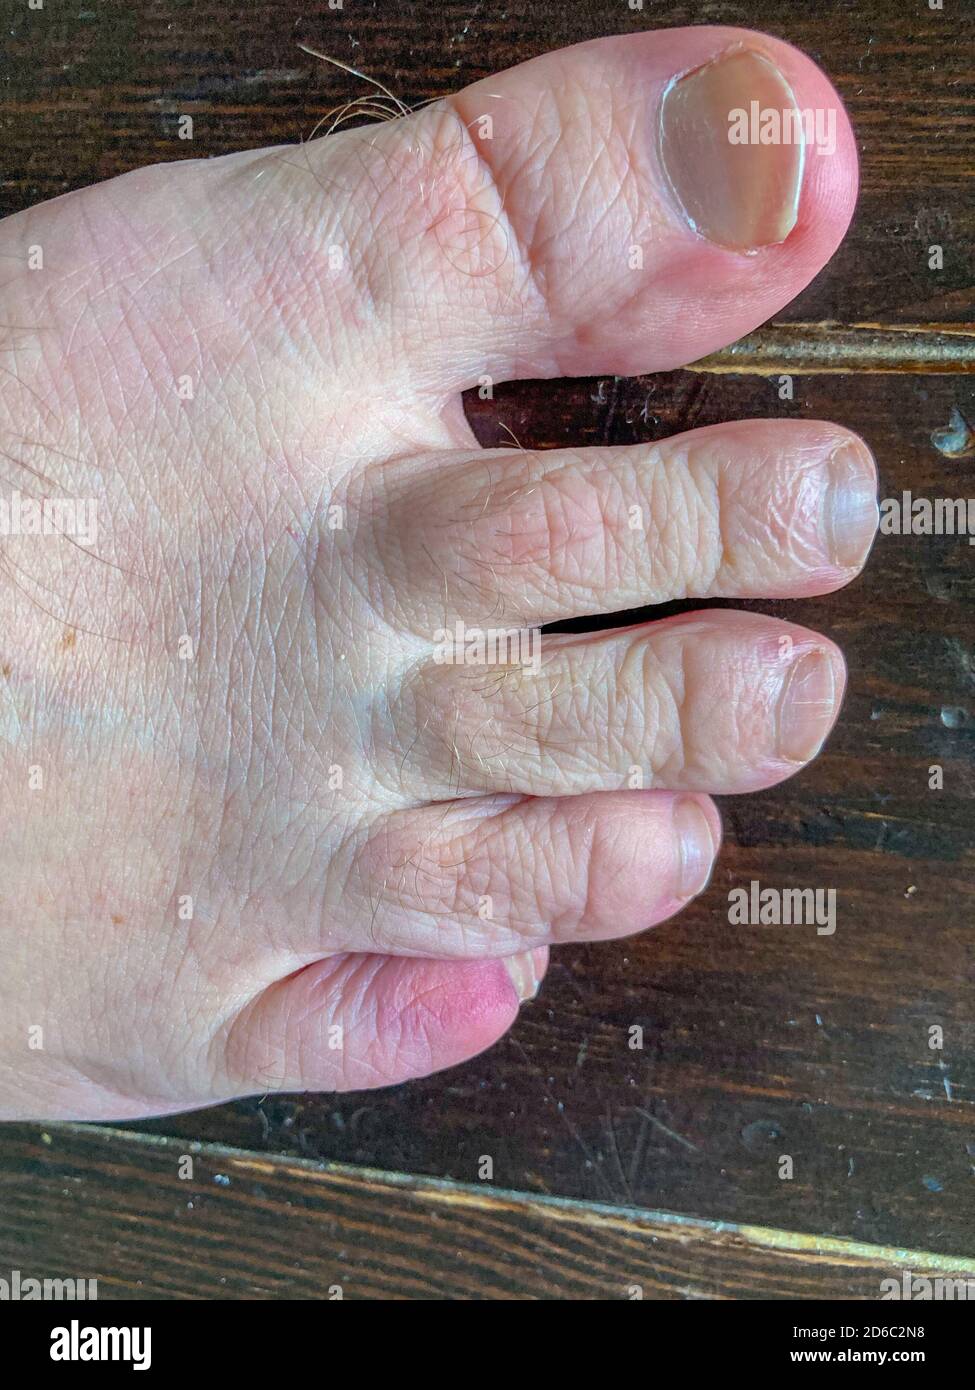 Bruised fractured little toe of a man in close up over a wooden deck as a result of blunt force trauma Stock Photo